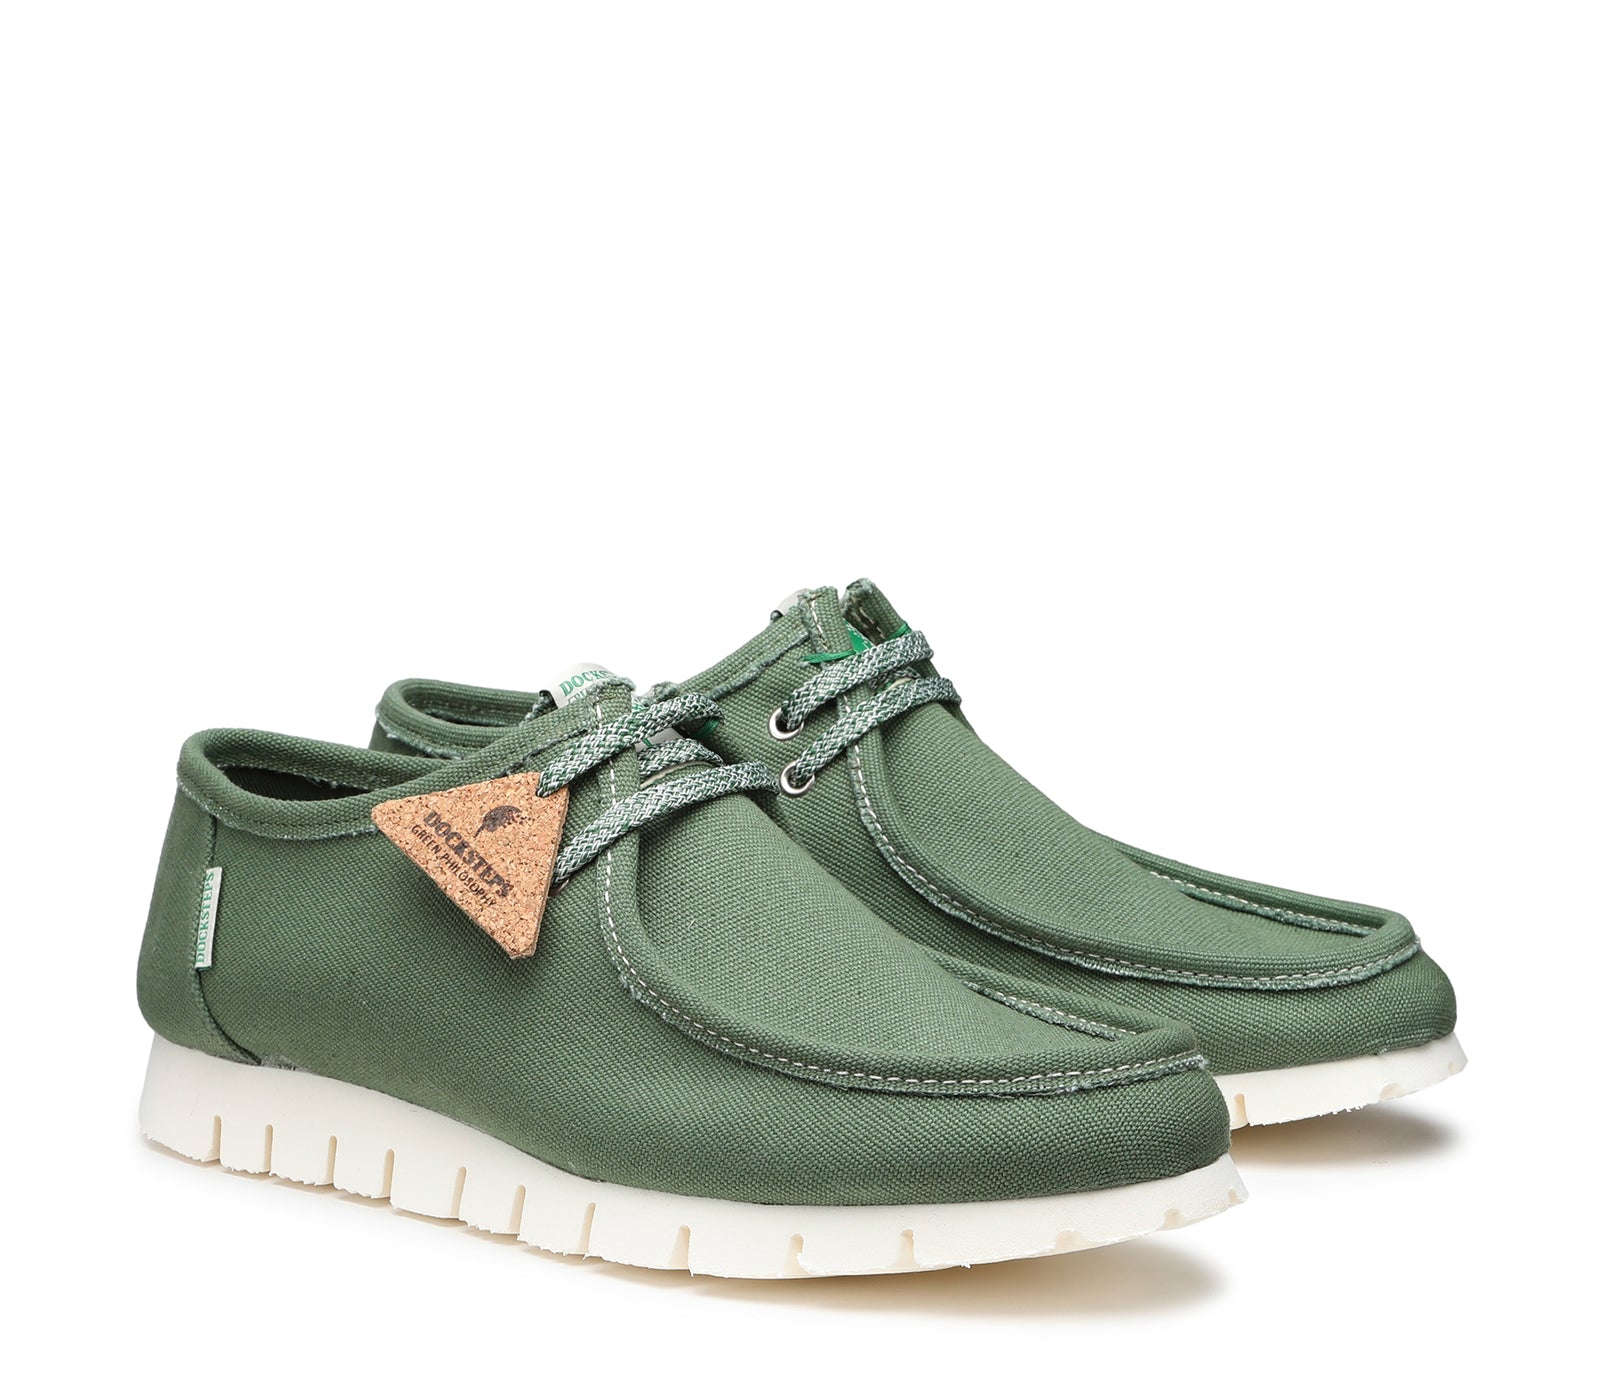 Green Canvas Men's Sustainable Moccasins